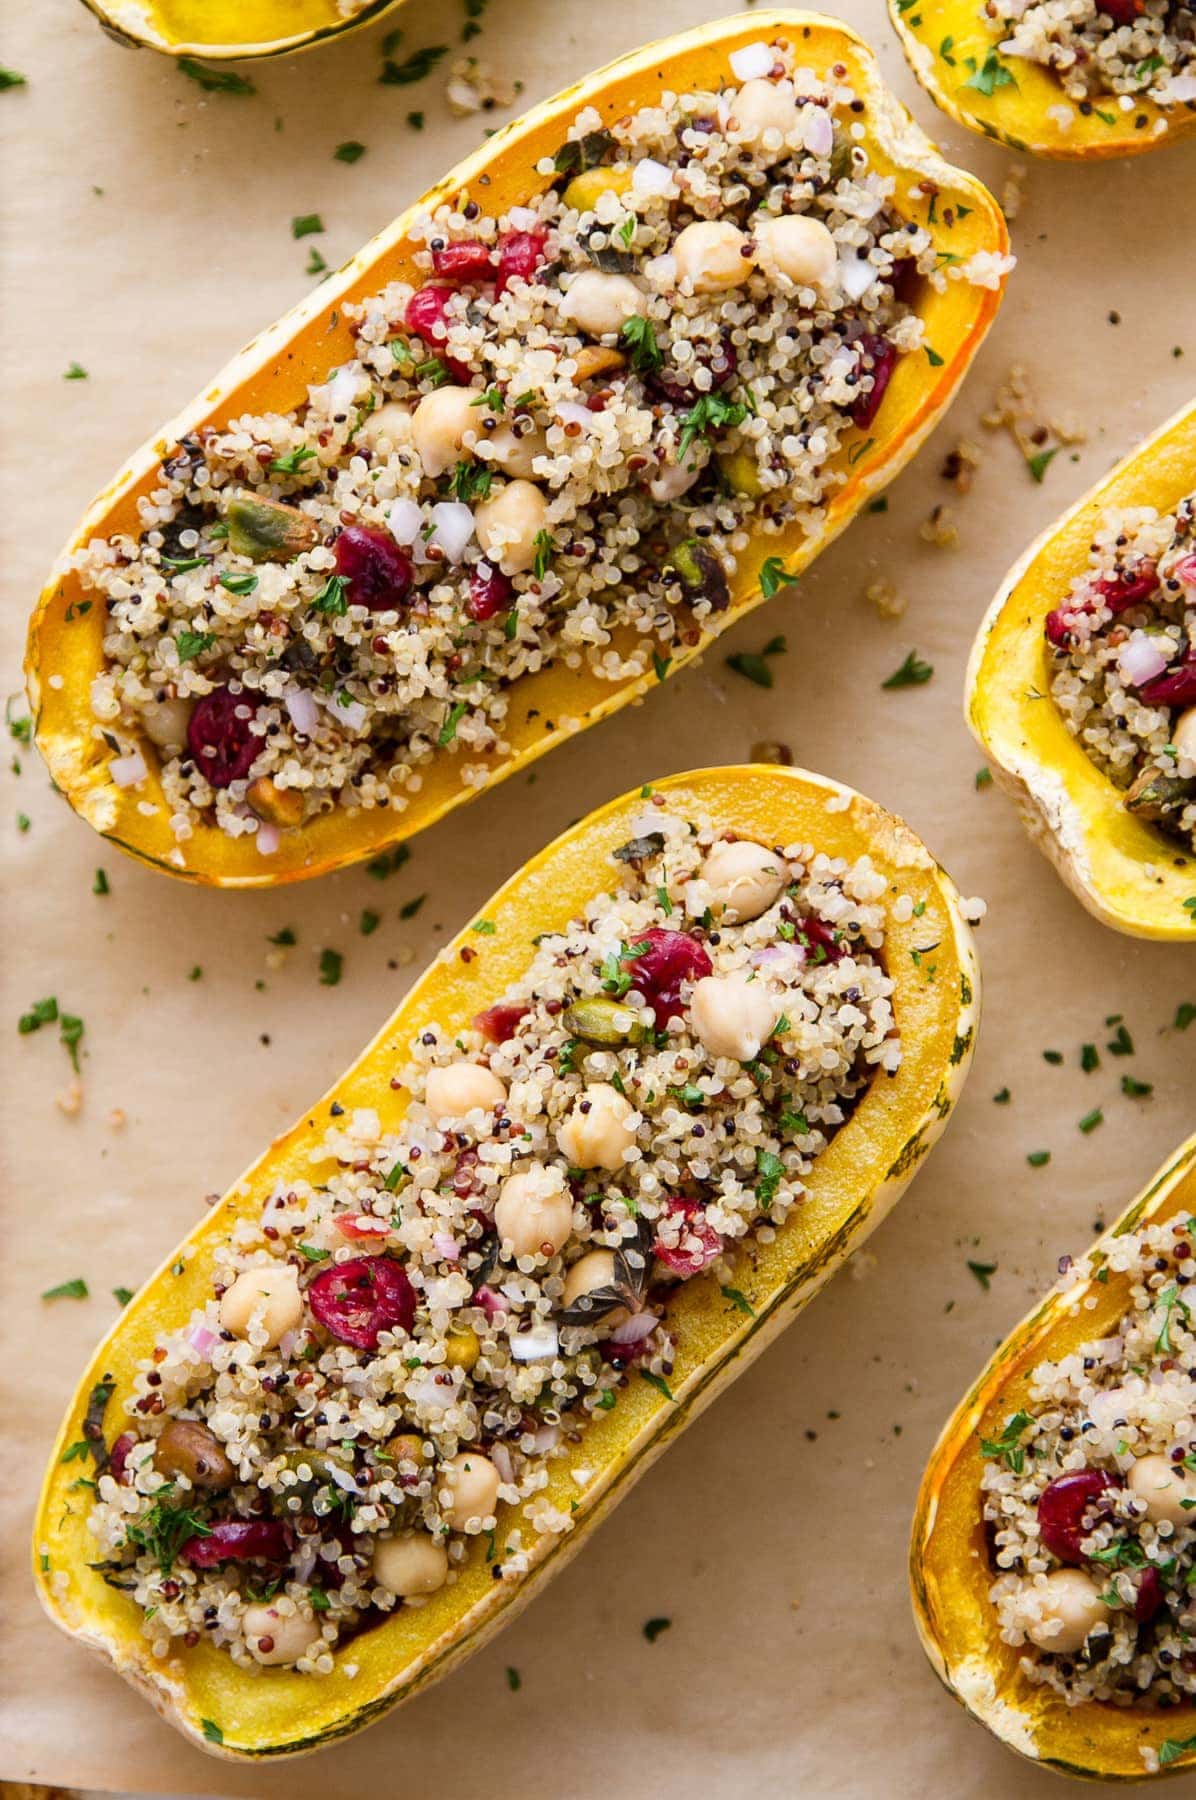 Top view of squash stuffed with quinoa.